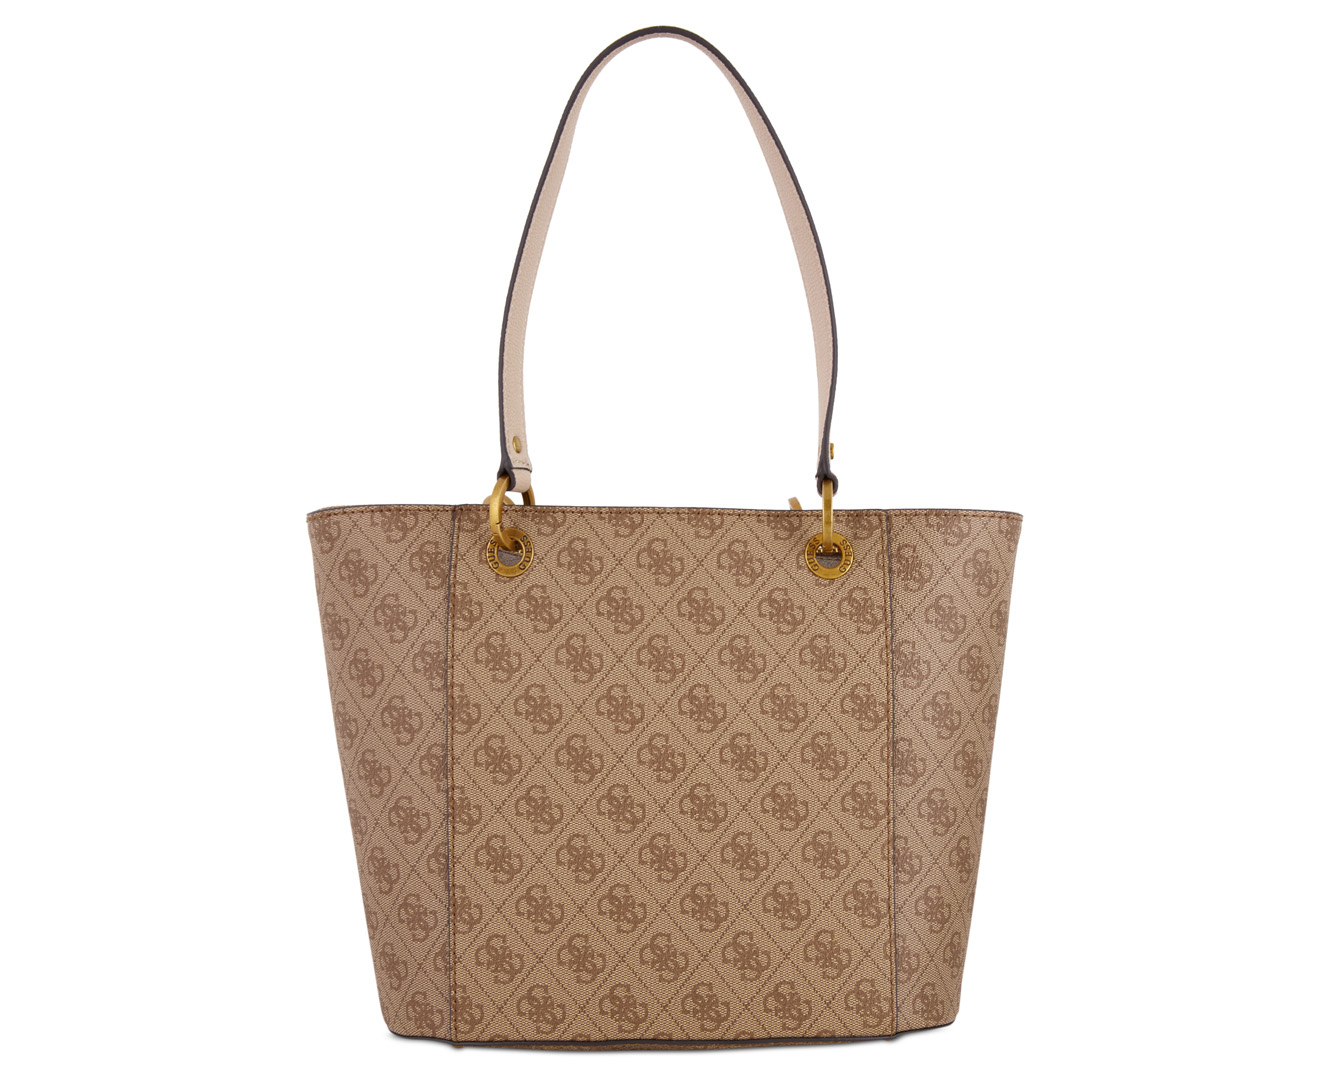 GUESS womens Noelle Small Elite Tote, Latte, One Size US